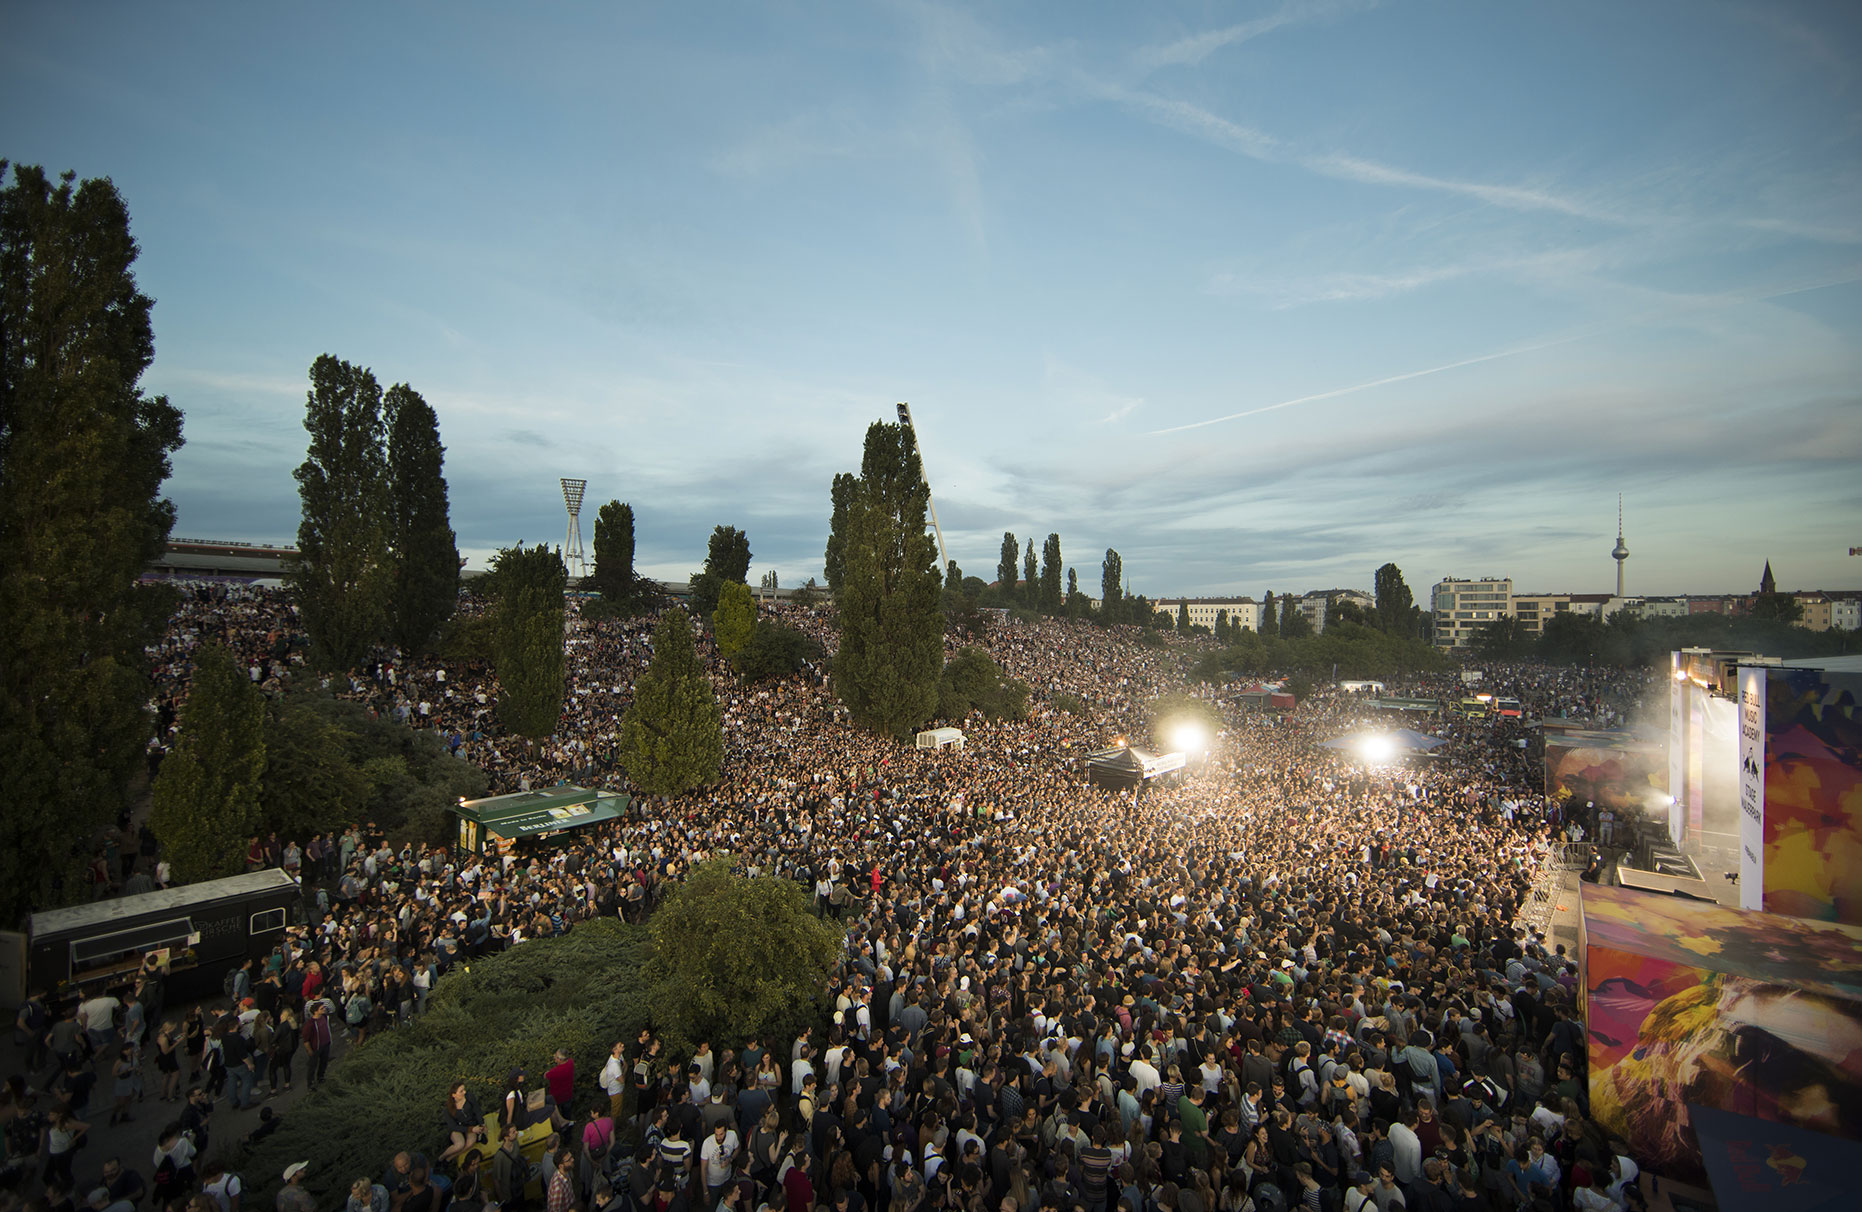 © Dirk Mathesius, Red Bull Music Academy Stage at Mauerpark in Berlin, client Red Bull, Germany